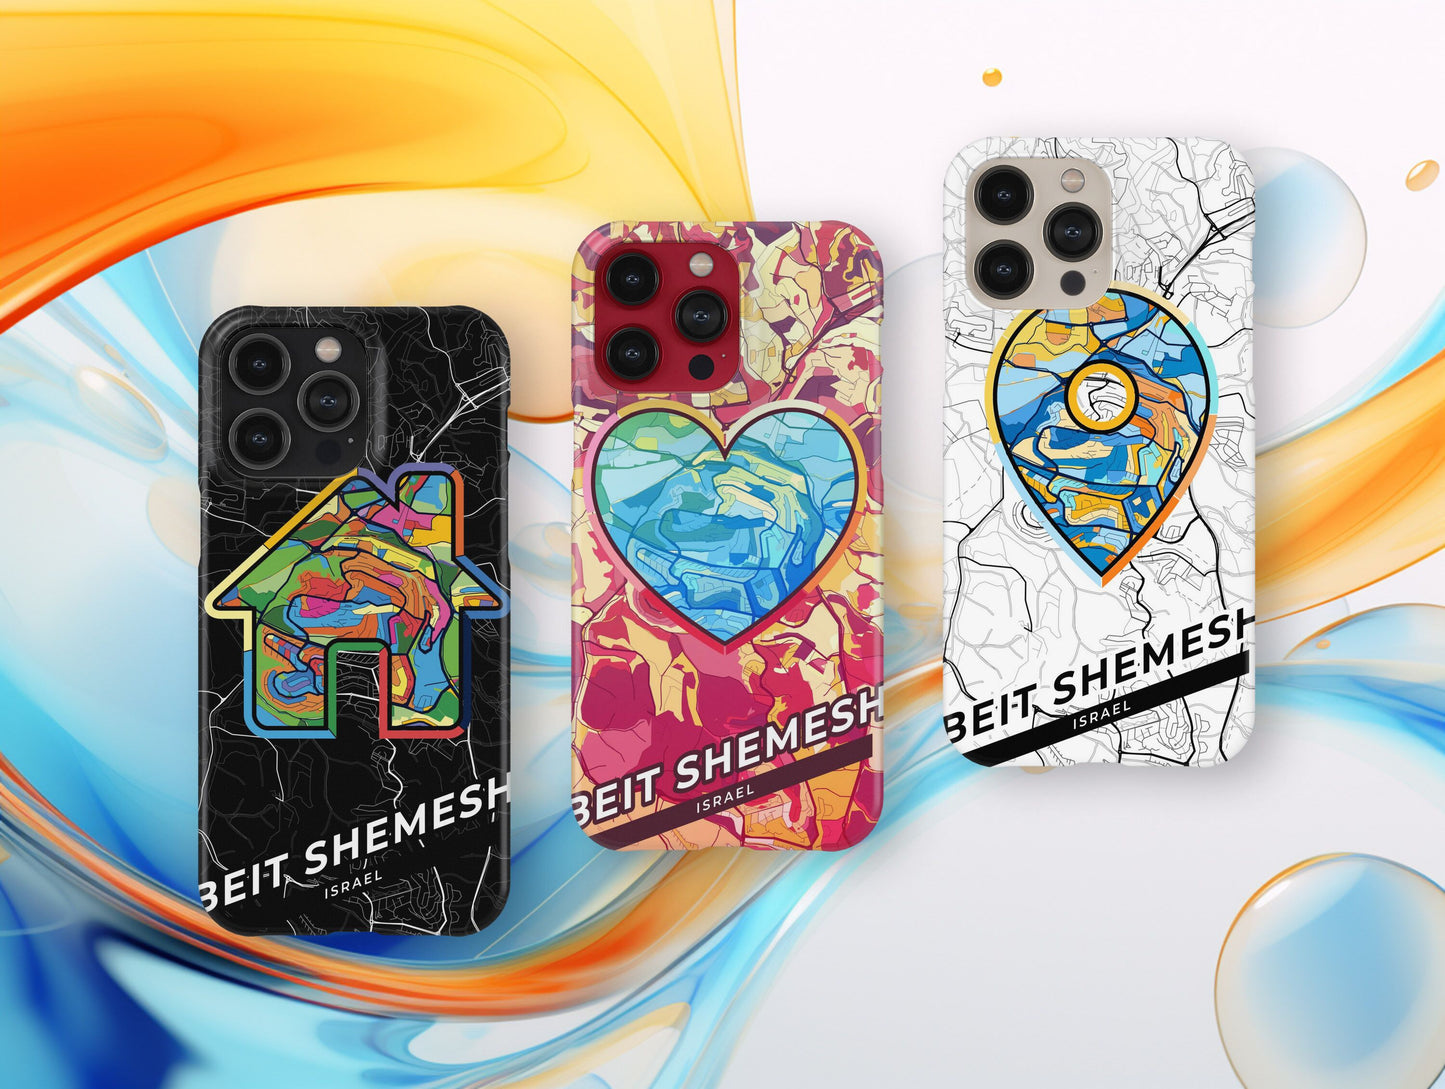 Beit Shemesh Israel slim phone case with colorful icon. Birthday, wedding or housewarming gift. Couple match cases.